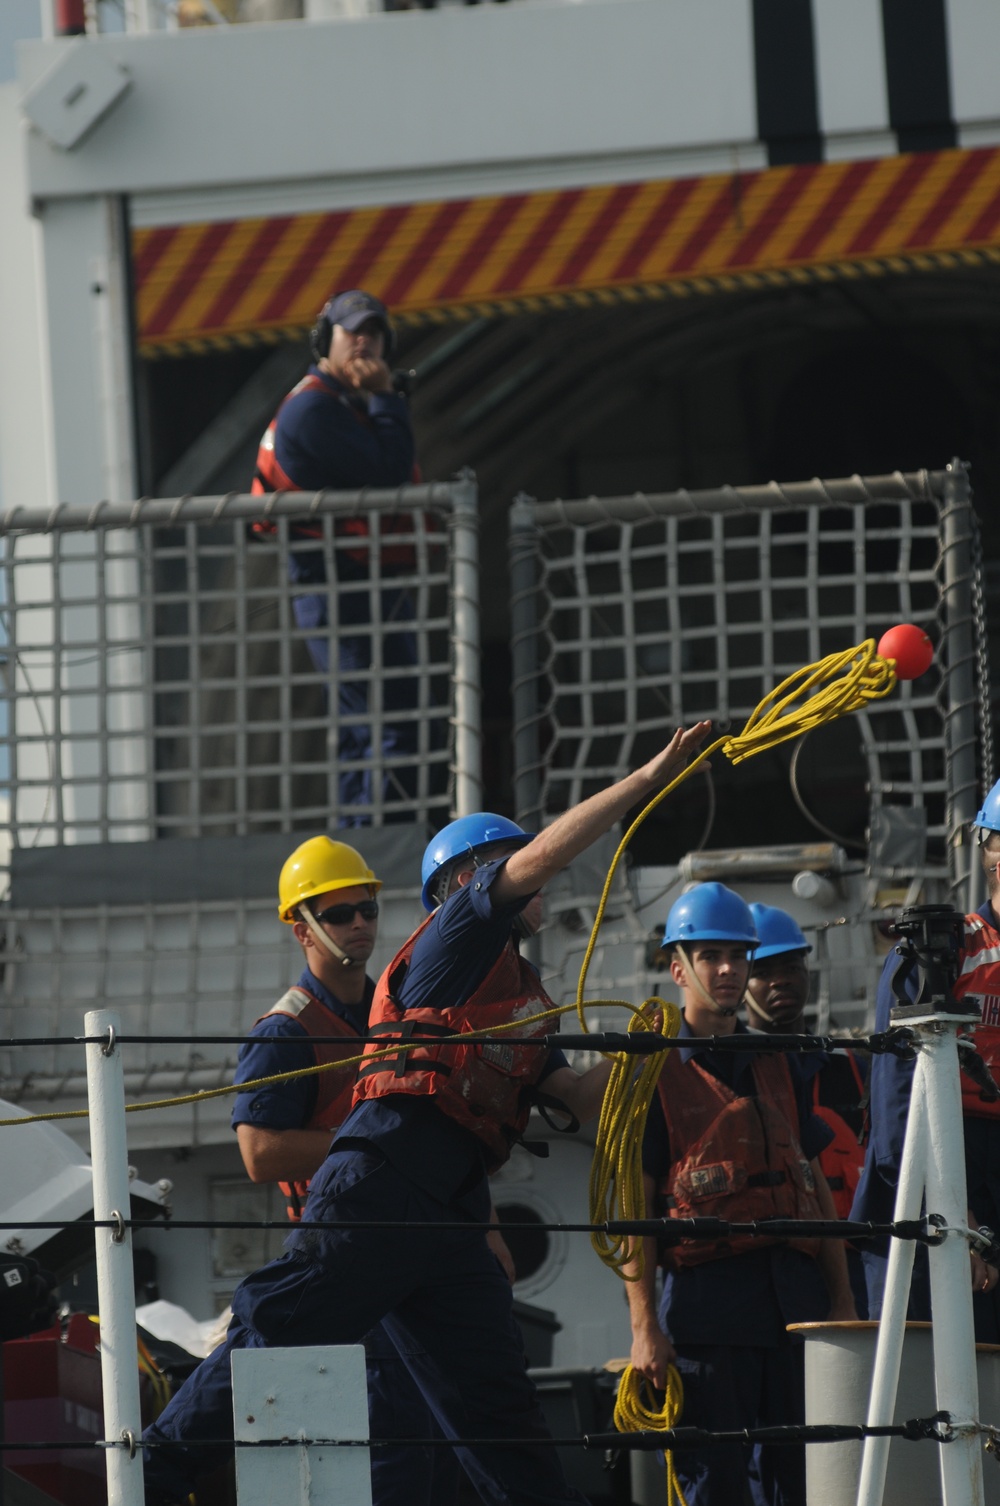 MSST Boston greets two Coast Guard Cutters, conducts training on Guantanamo Bay